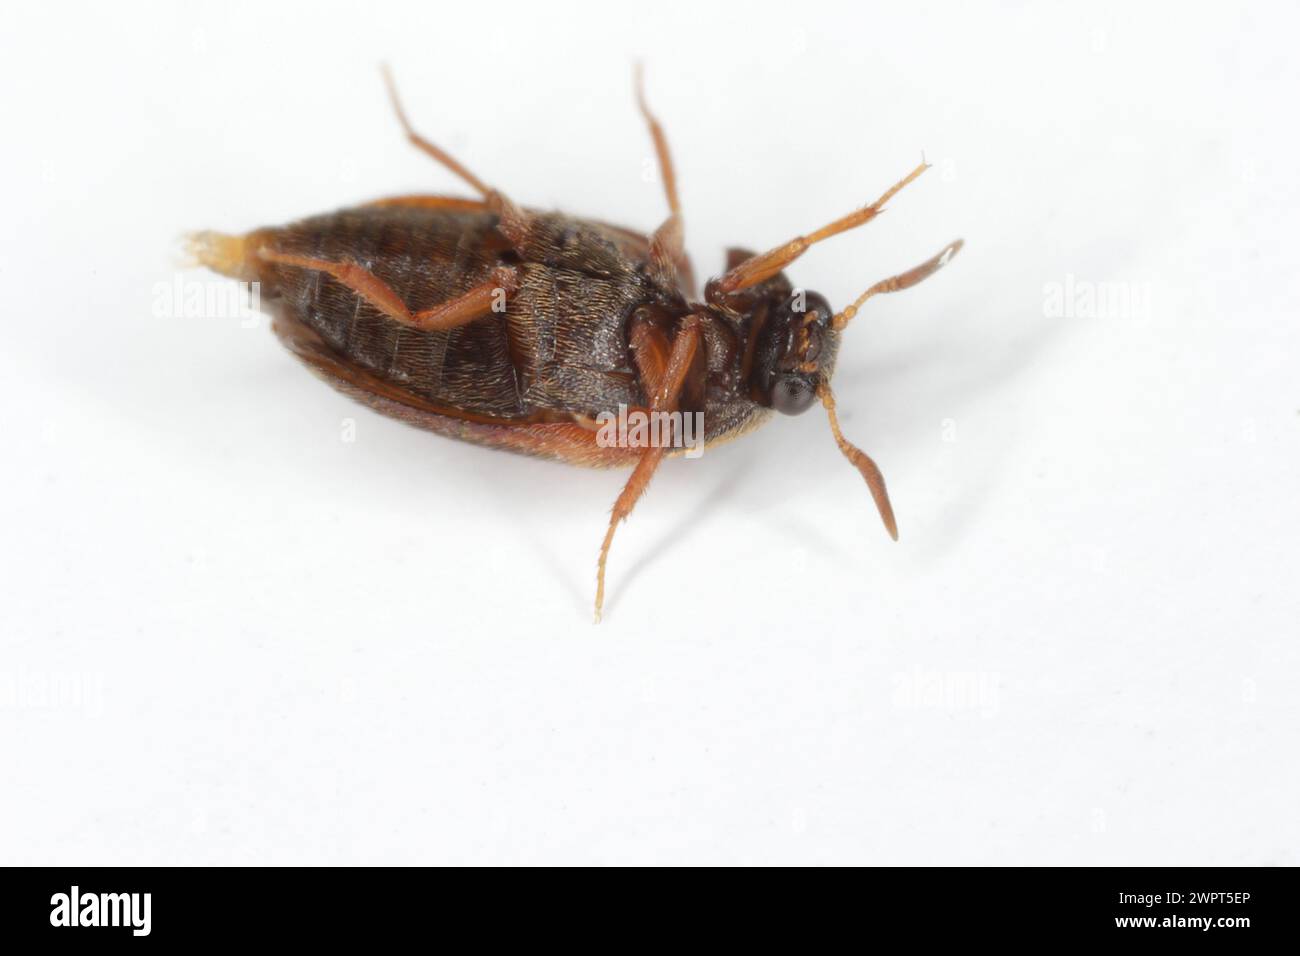 The brown carpet beetle Attagenus smirnovi Dermestidae family a synanthropic pest which lives in human homes and apartments. Stock Photo